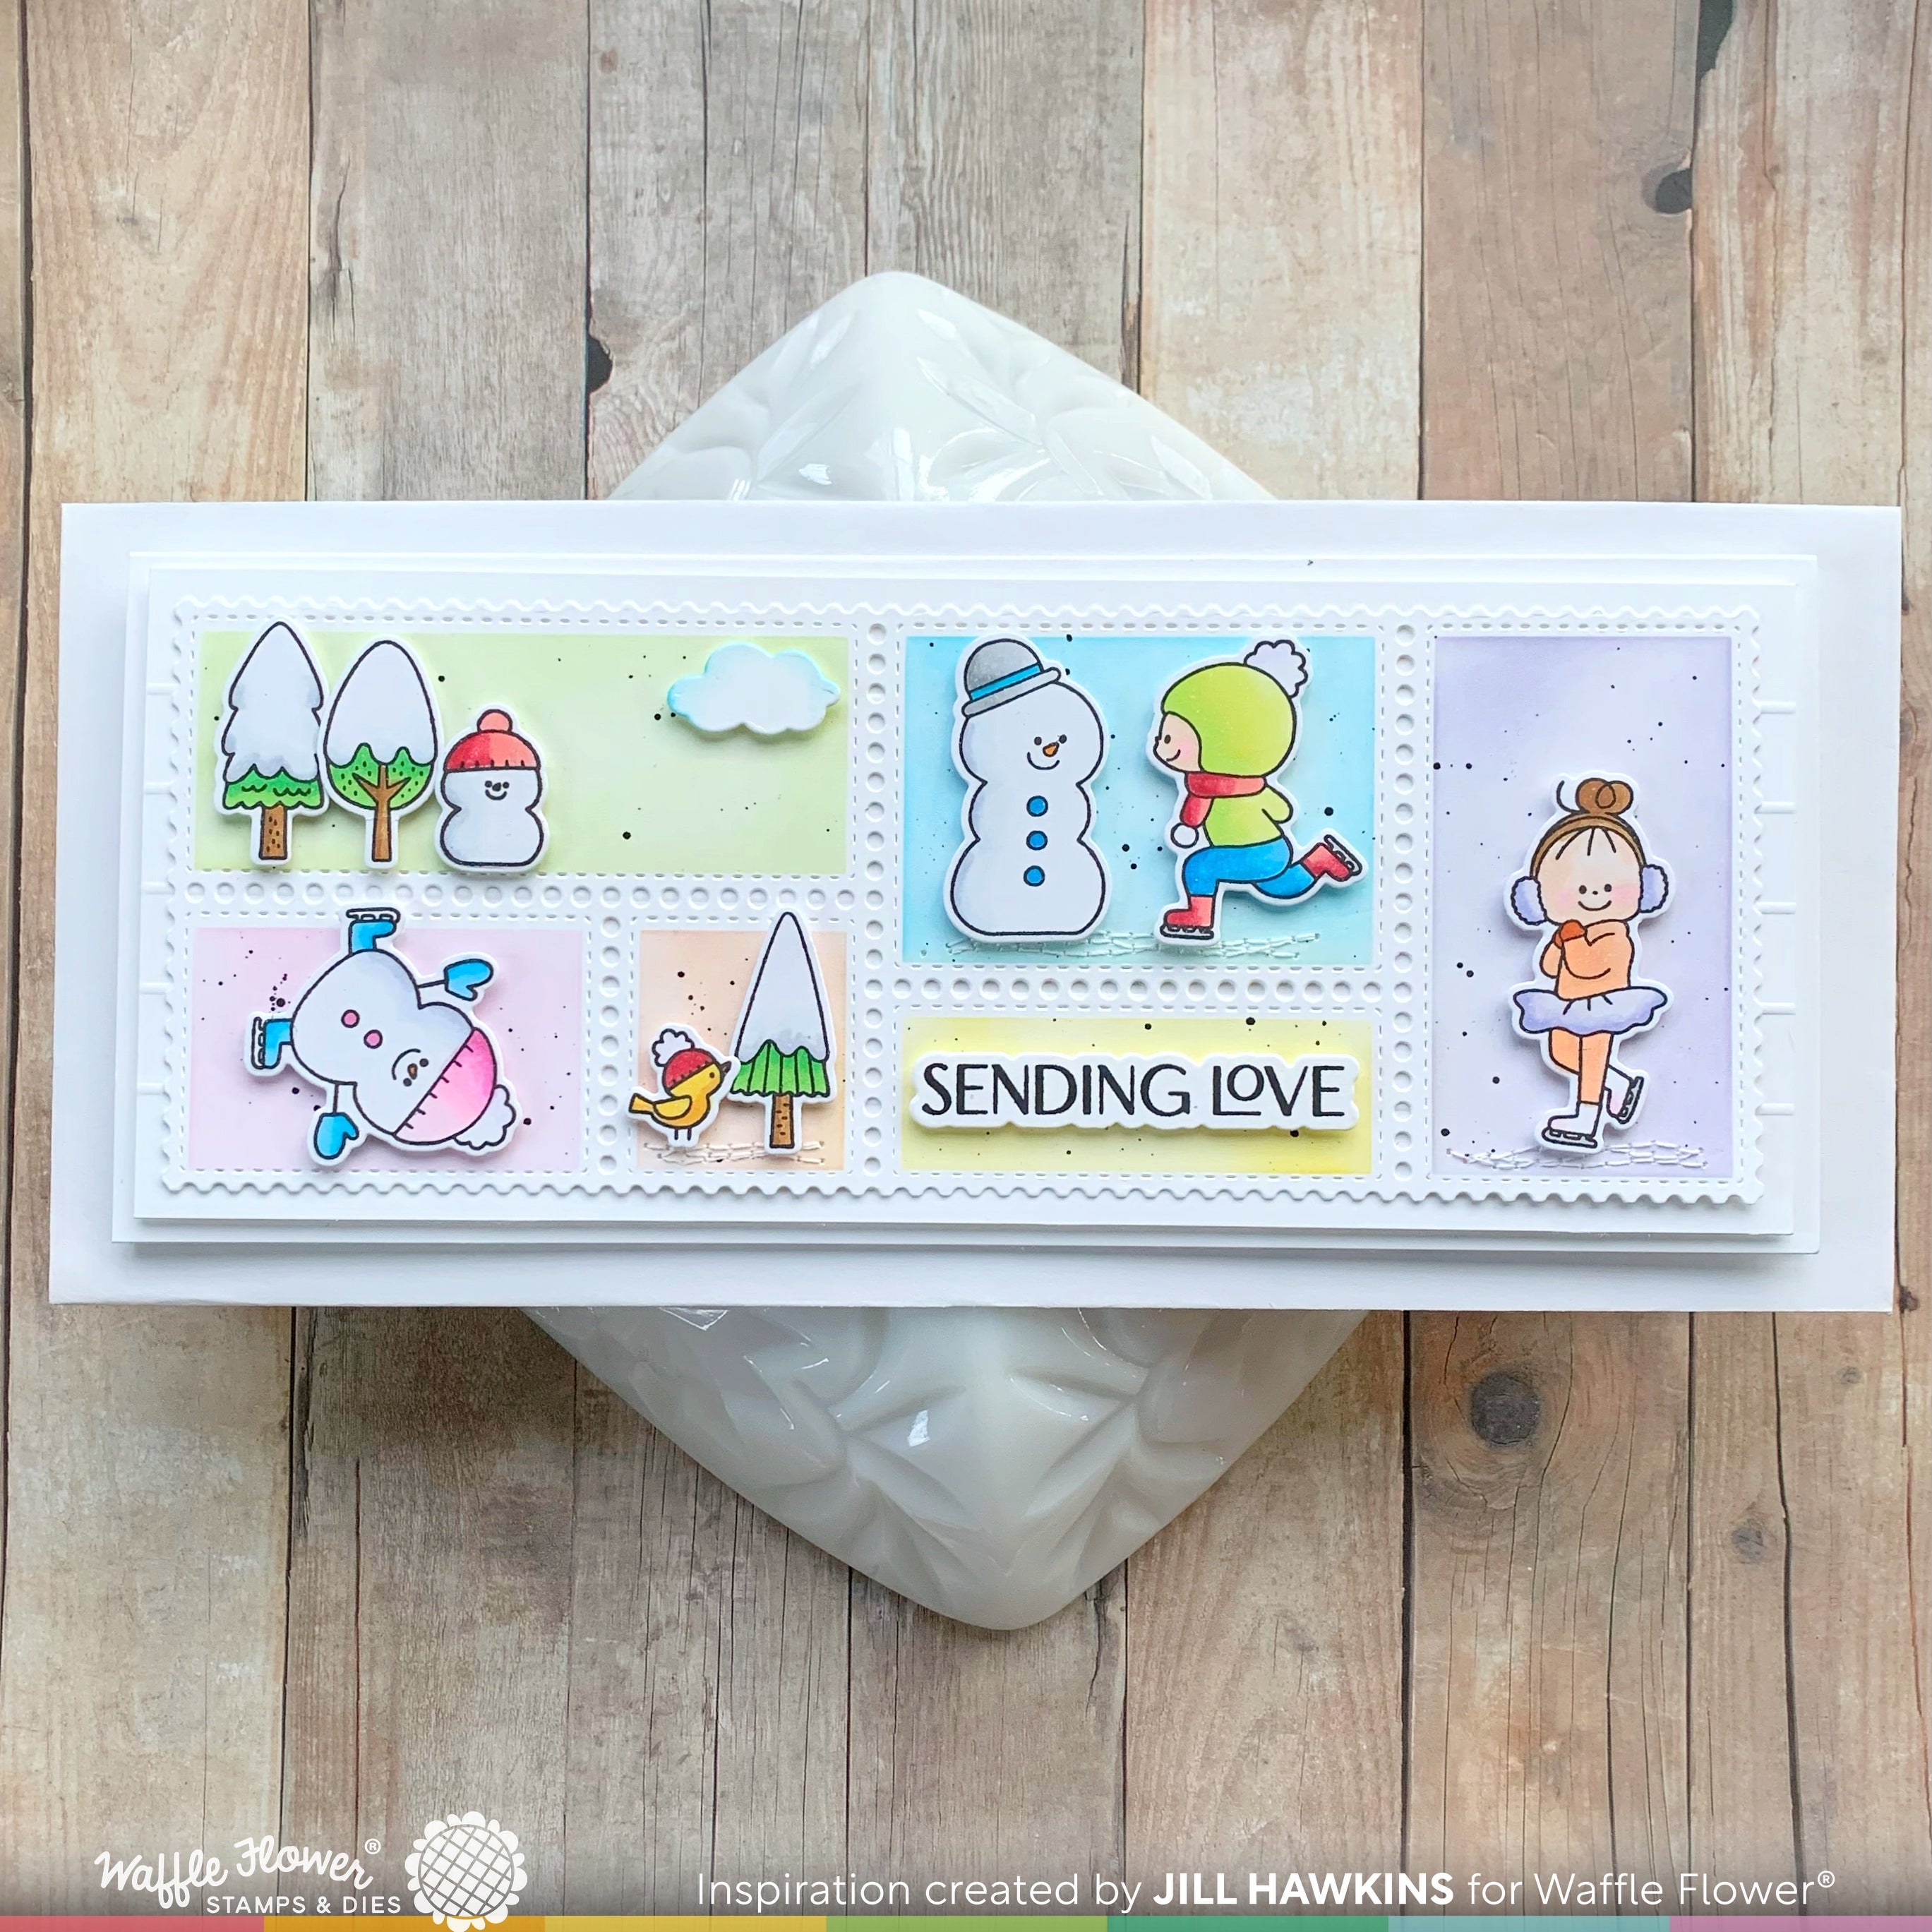 Waffle Flower - Planner STAY FOCUSED Clear Stamps - 25% OFF! – Hallmark  Scrapbook